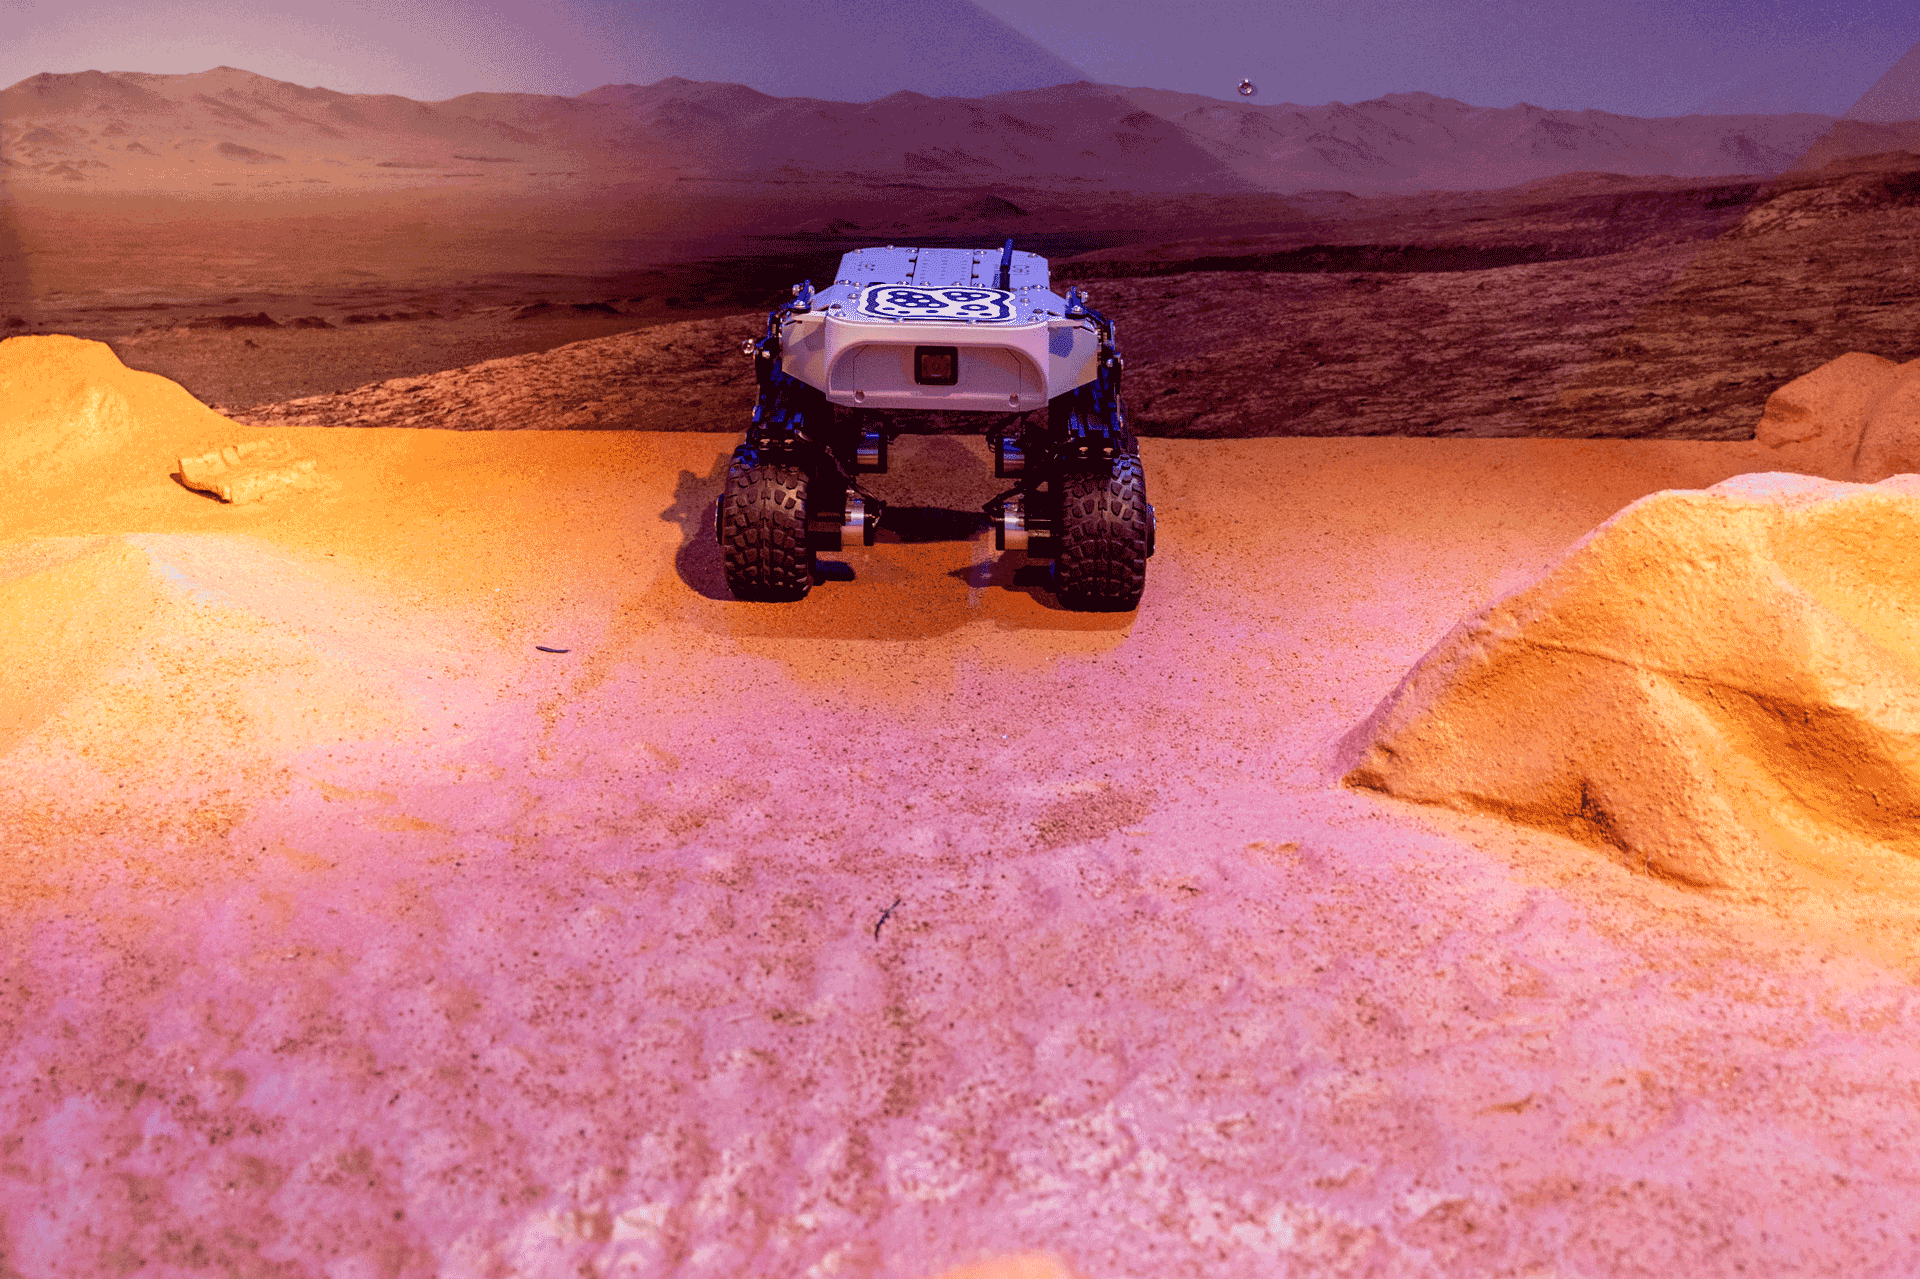 A Mars rover model stands in the Martian landscape